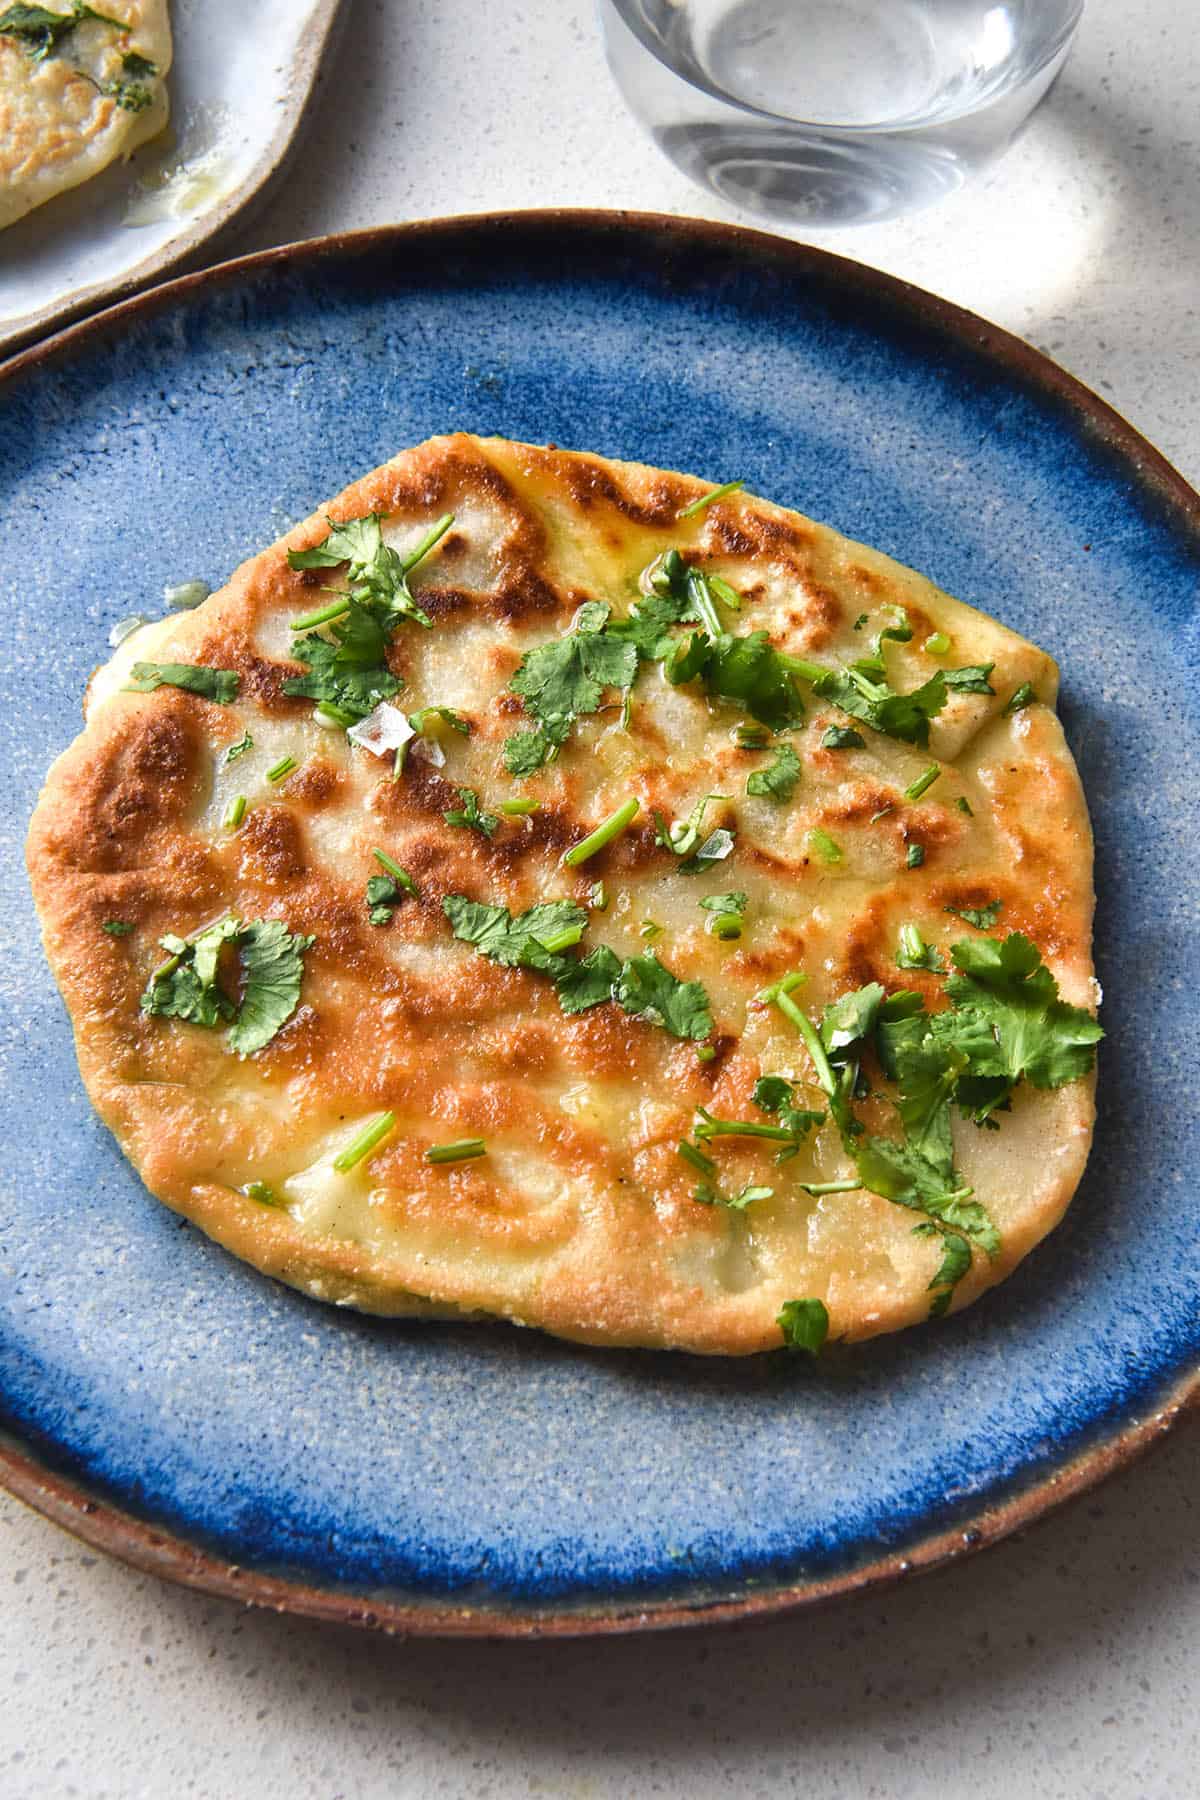 A close up image of a gluten free cheesy naan topped with garlic infused ghee, chopped parsley and sea salt flakes. The naan sits atop a sky blue ceramic plate on a white benchtop. Another plate of naan and a water glass sit to the top of the image.